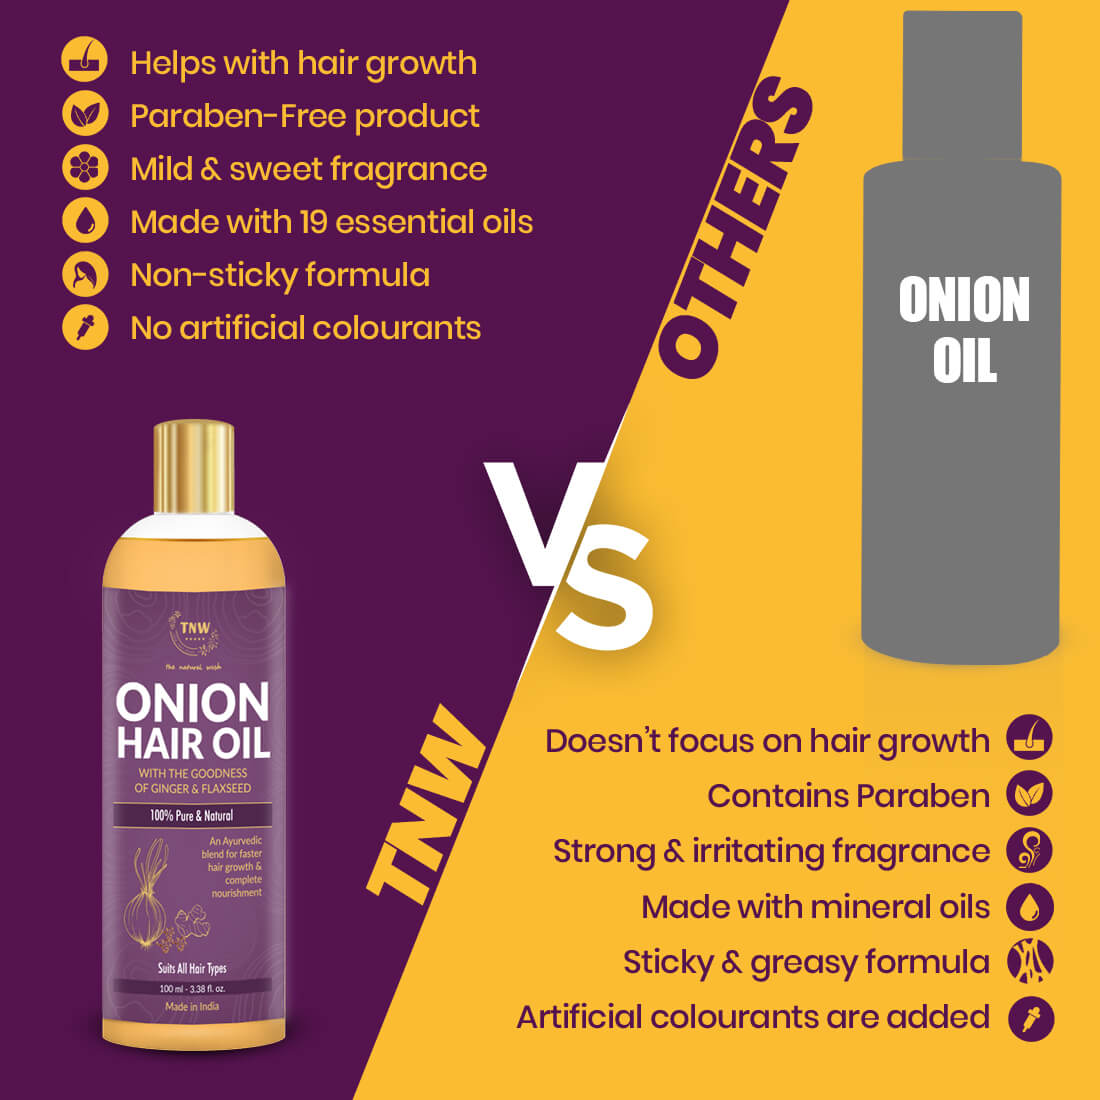 Top 10 Best Onion Hair Oil For Hair Growth In India | Best in Beauty -  YouTube